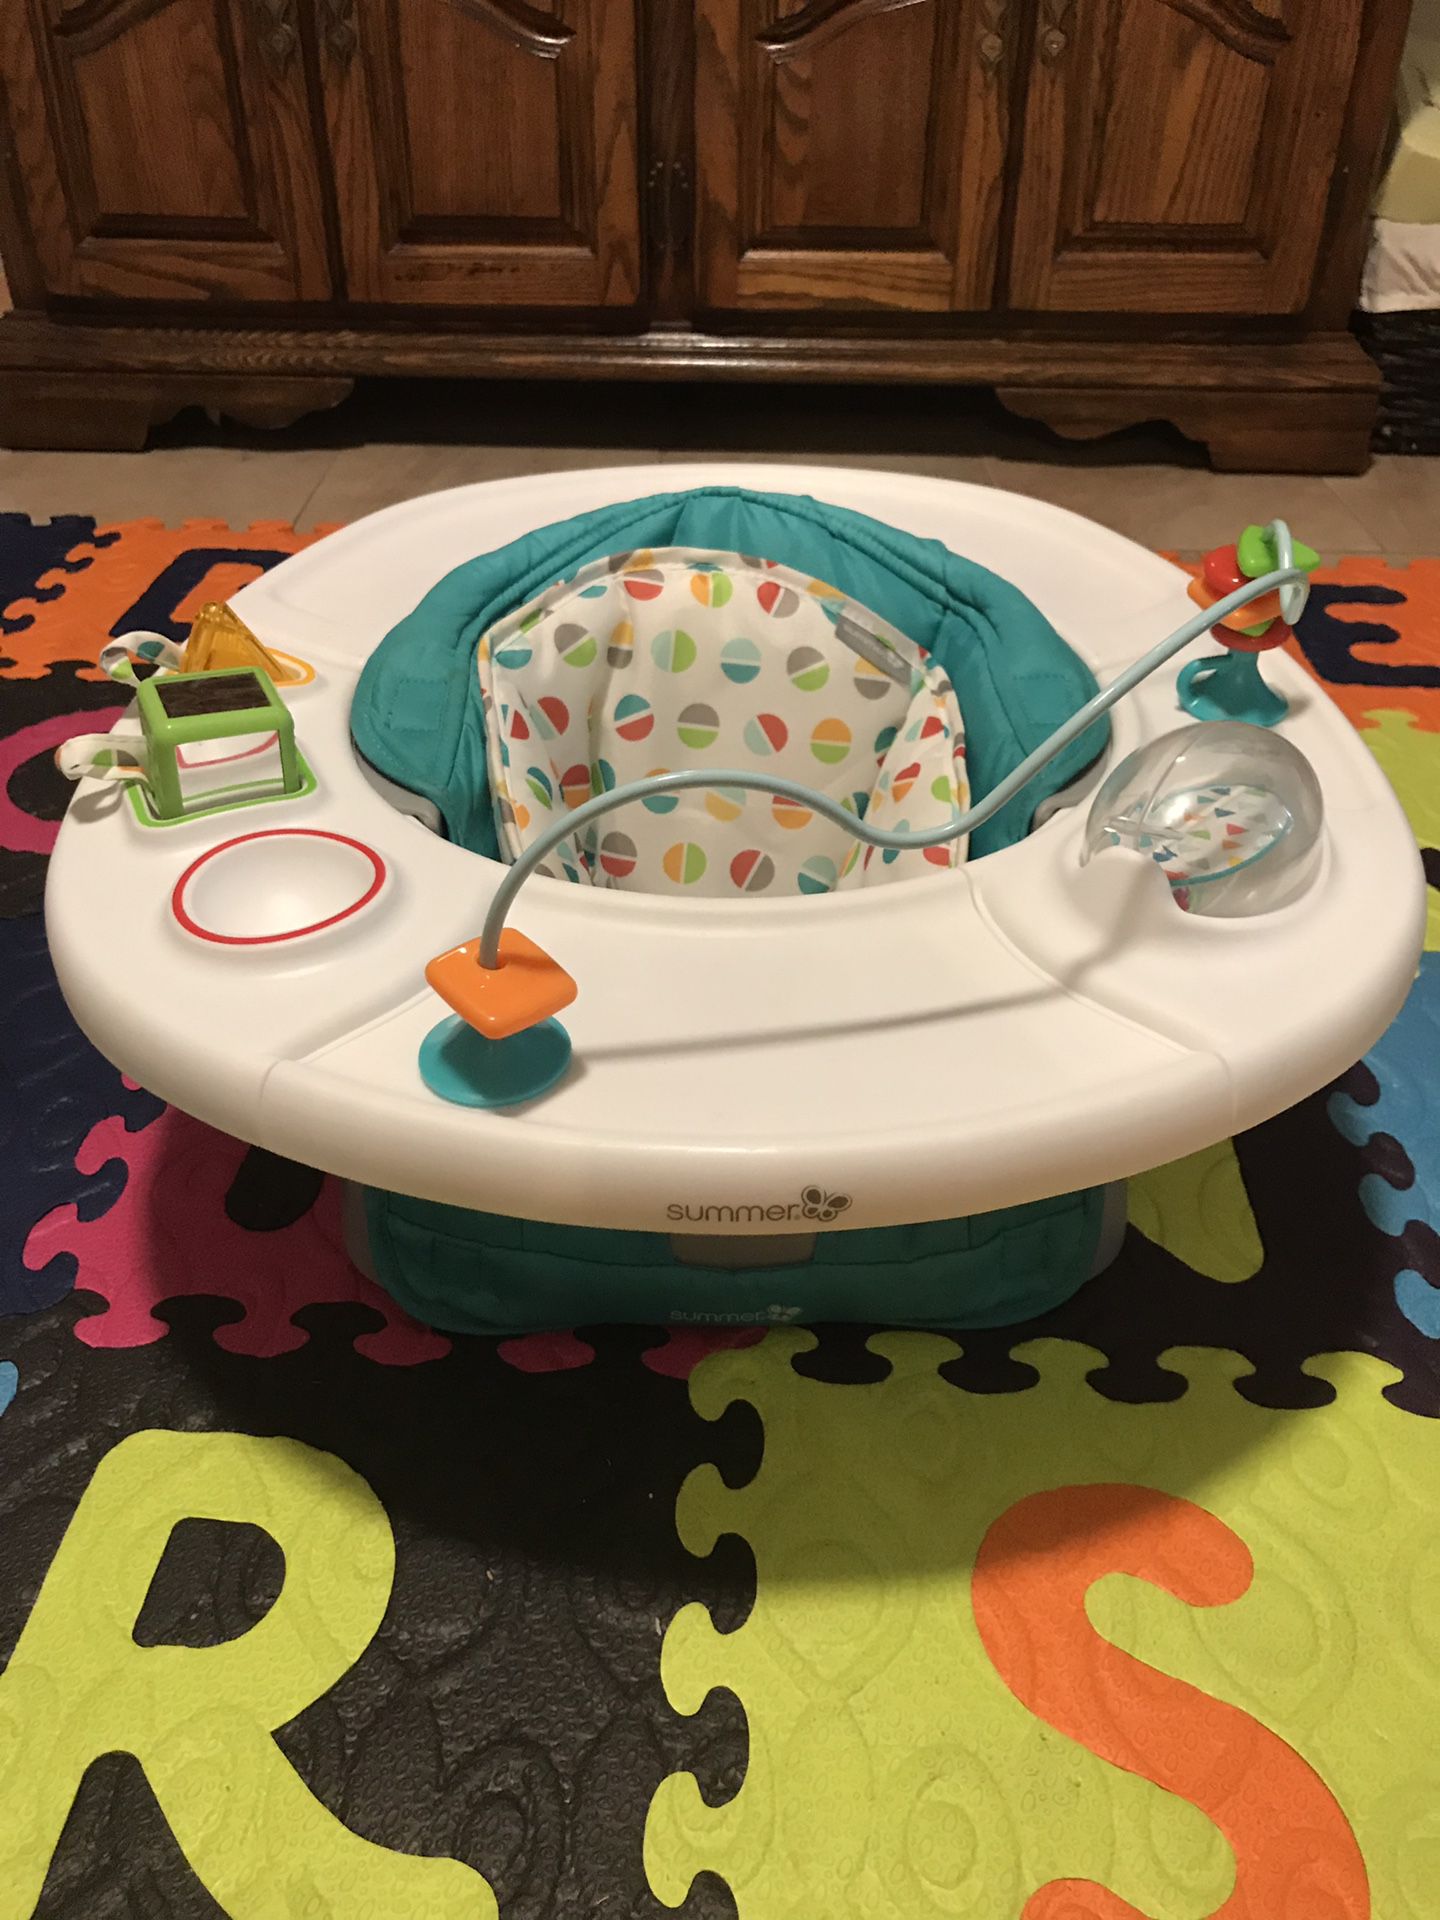 Summer infant 4 - in - 1 activity seat